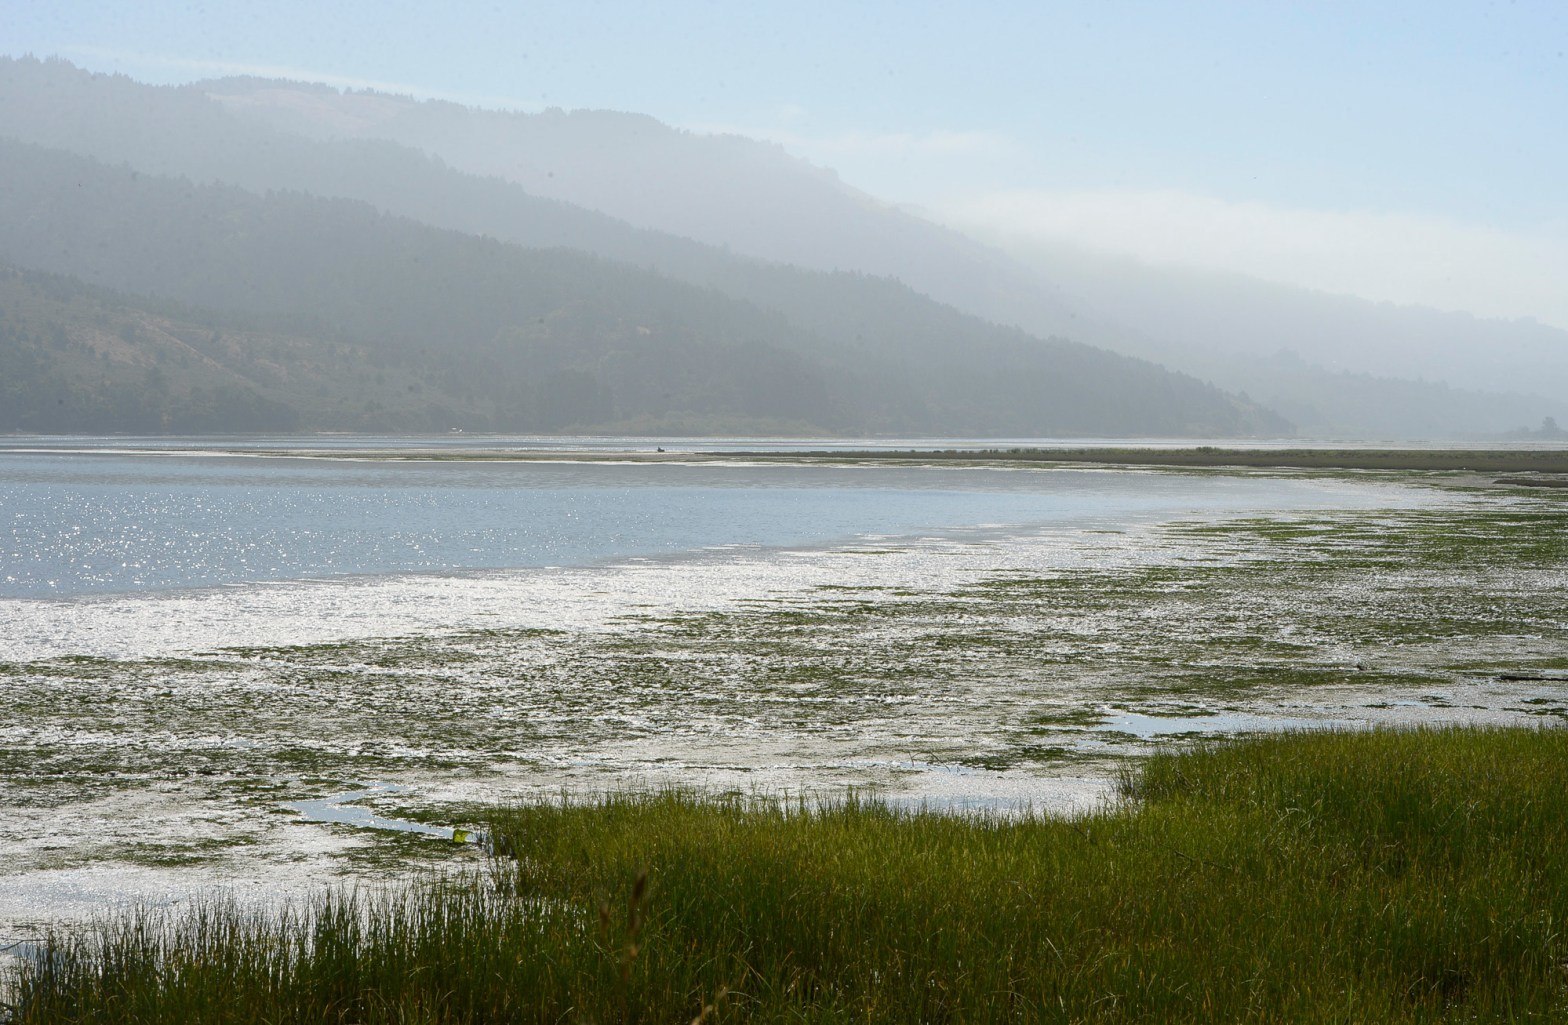 Volunteers have been working to remove ice plant and other invasive plants in Bolinas Lagoon that are pushing out native plants that provide food and shelter for birds and marine life. April 2021